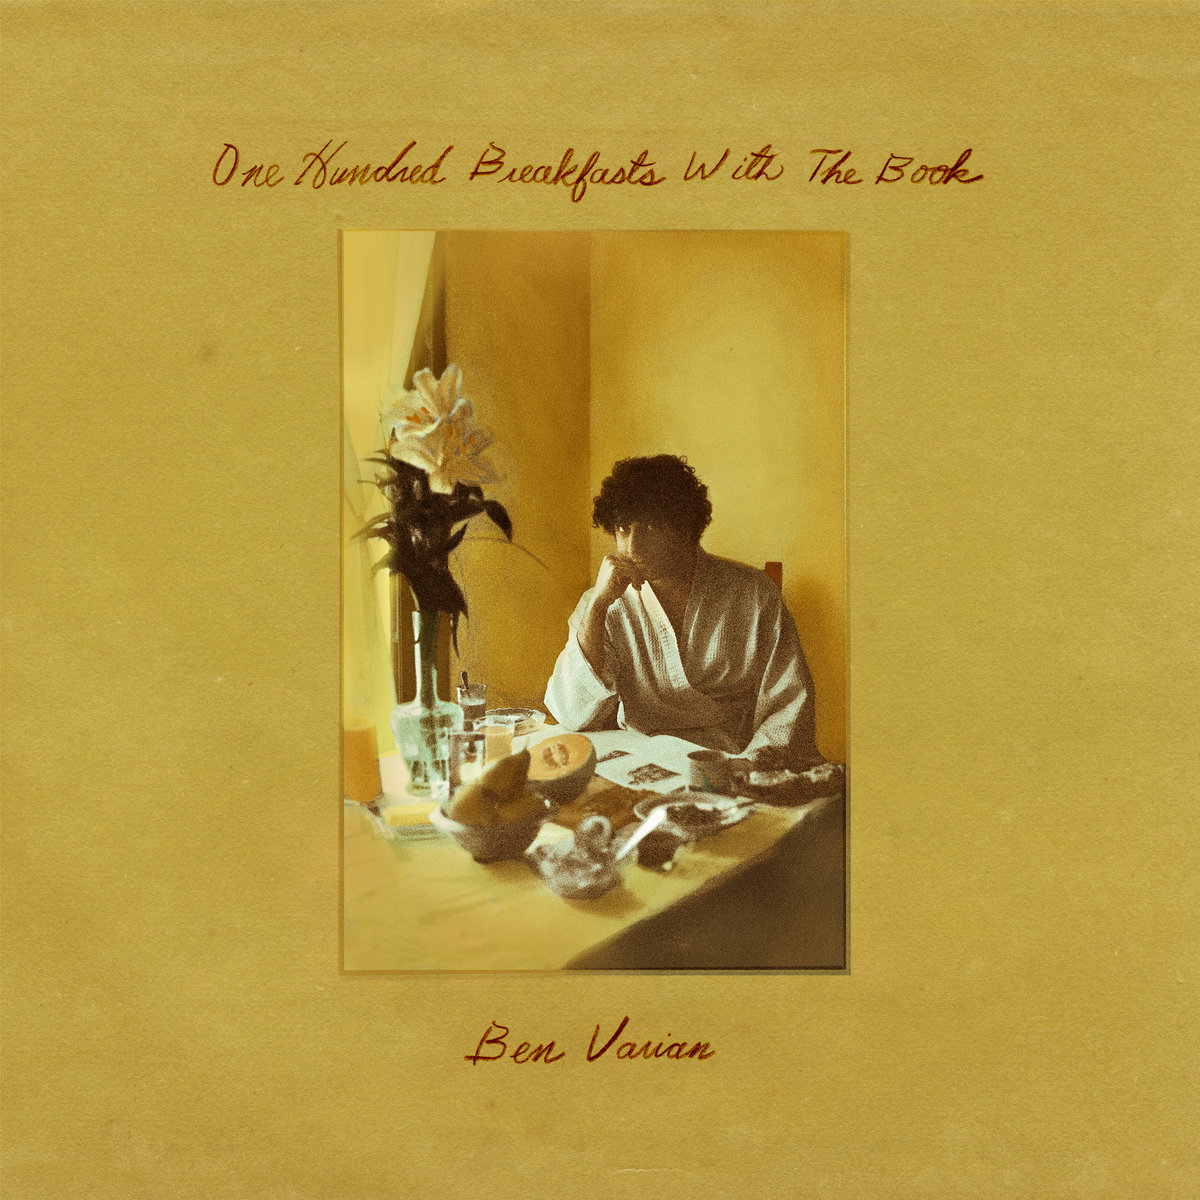 ben varian One Hundred Breakfasts with the Book album cover